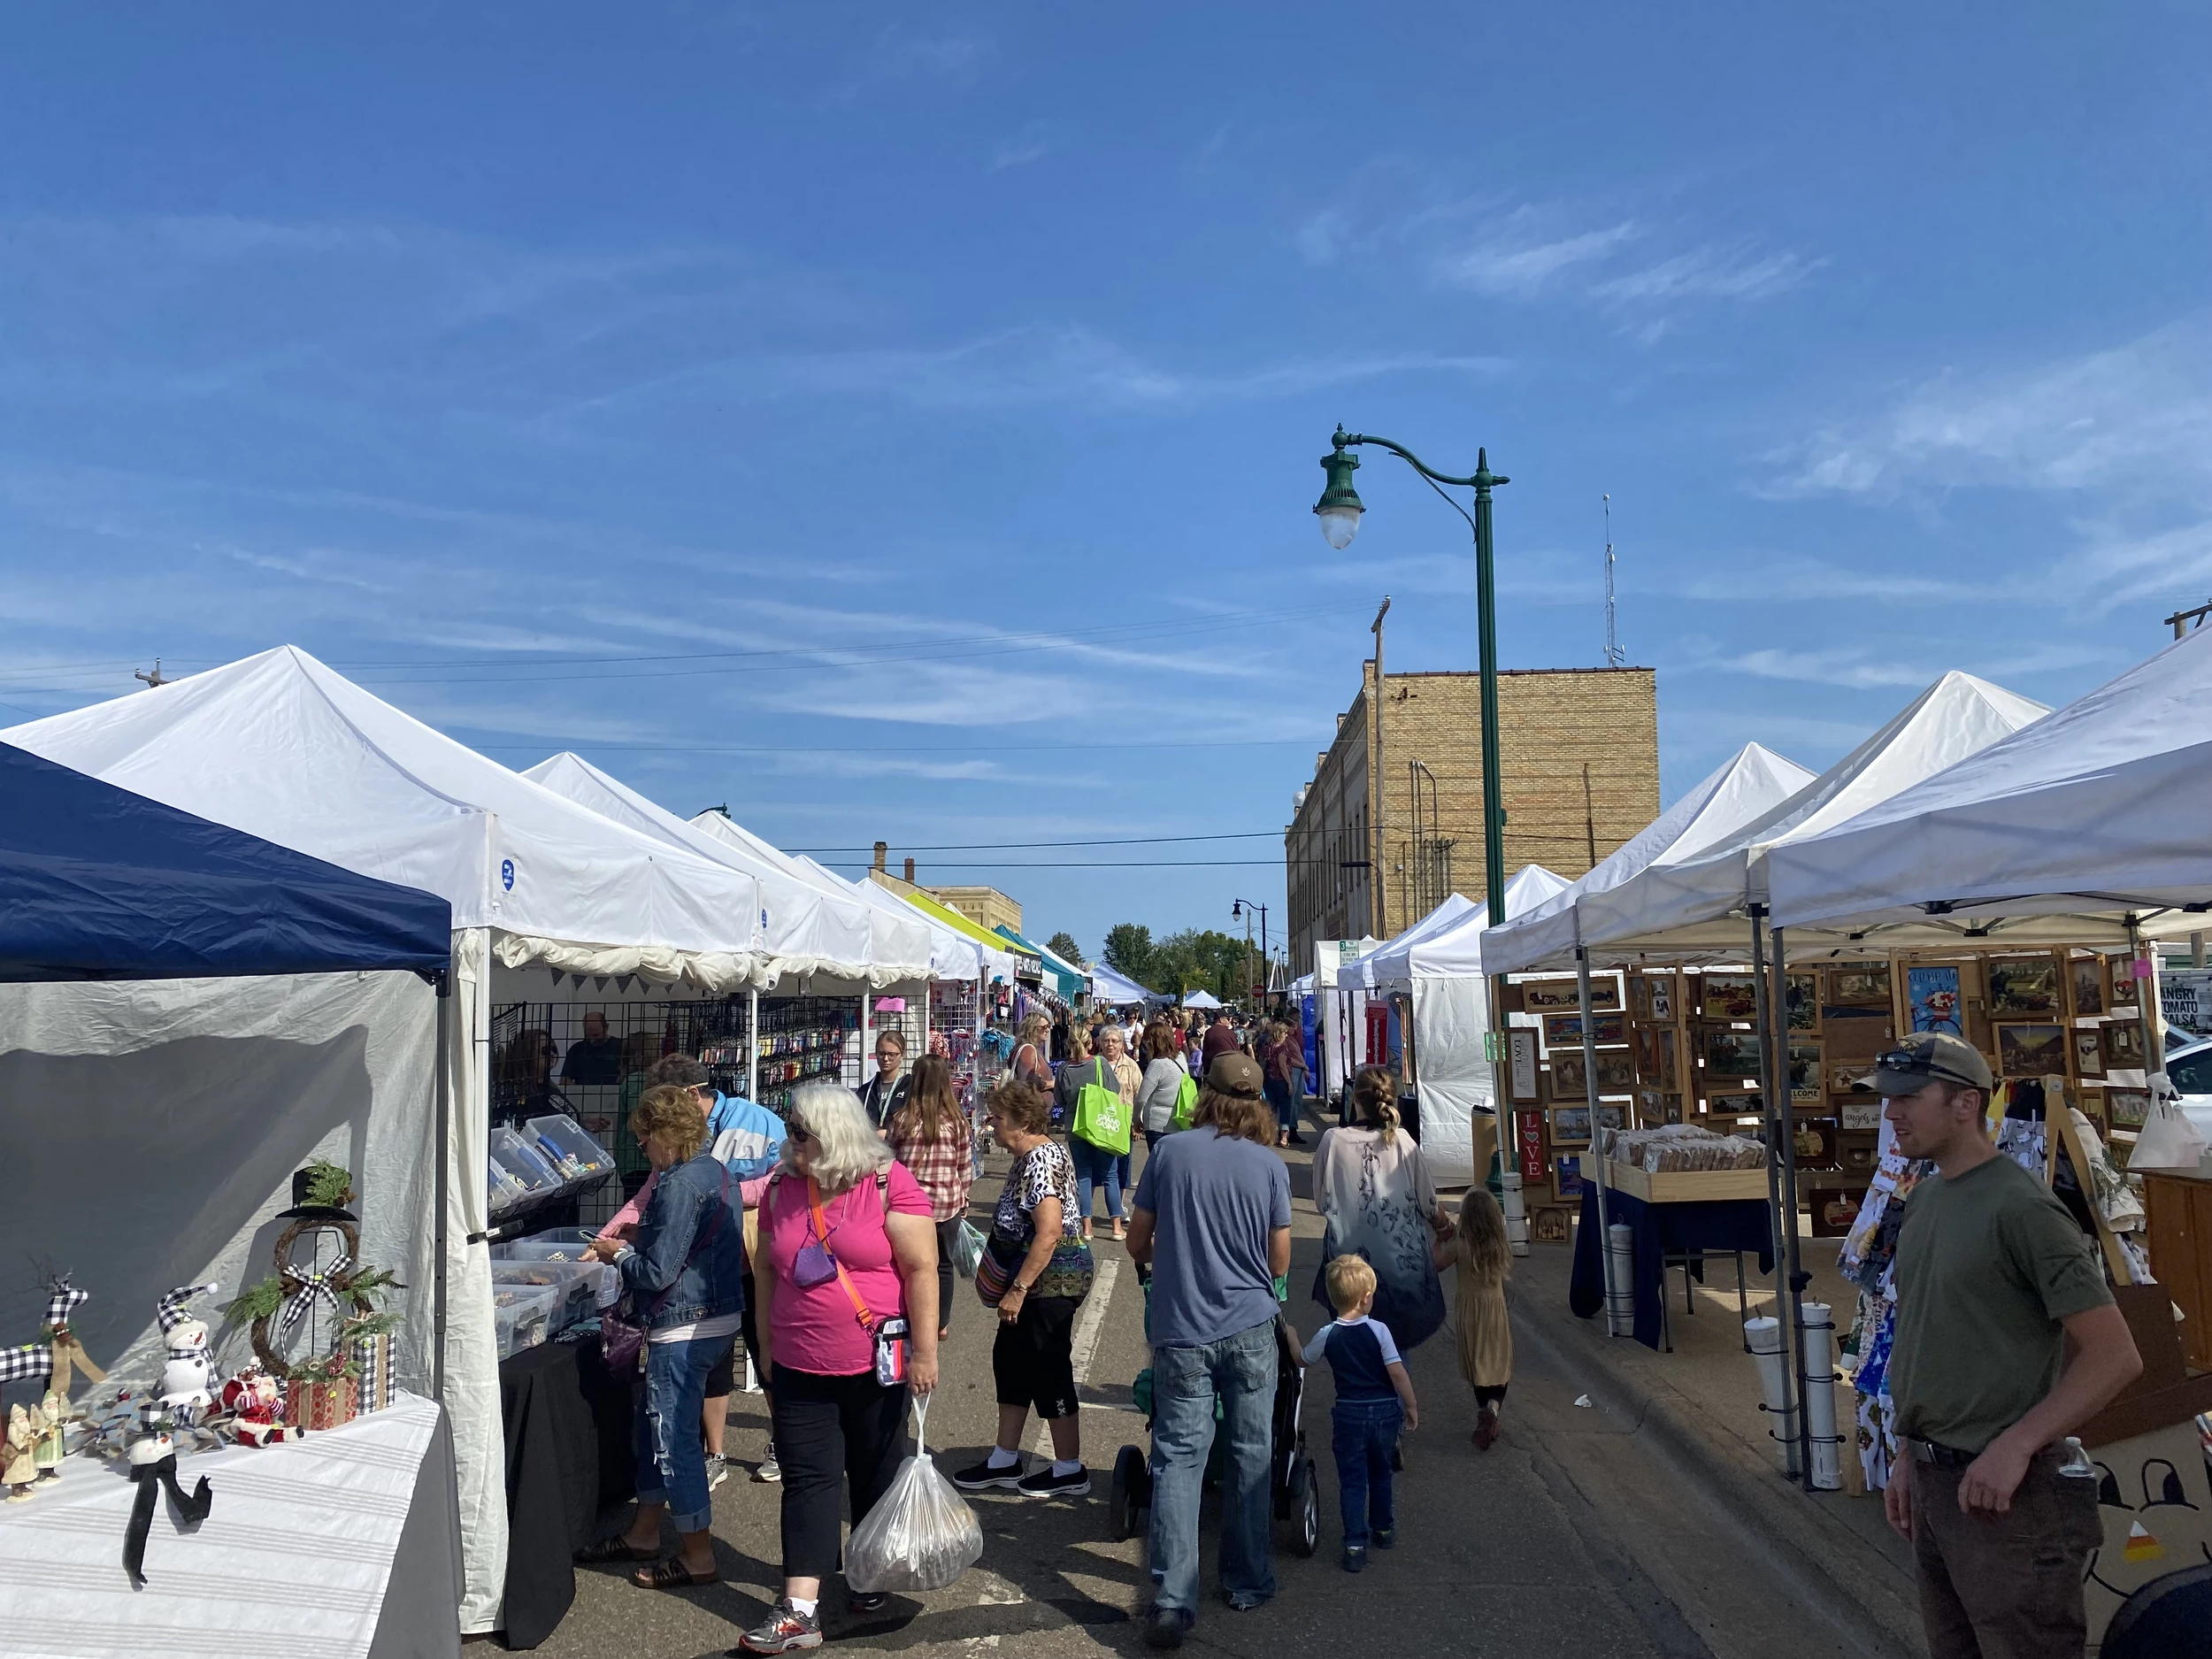 10 Reasons You NEED to Check Out the Little Falls Craft Fair